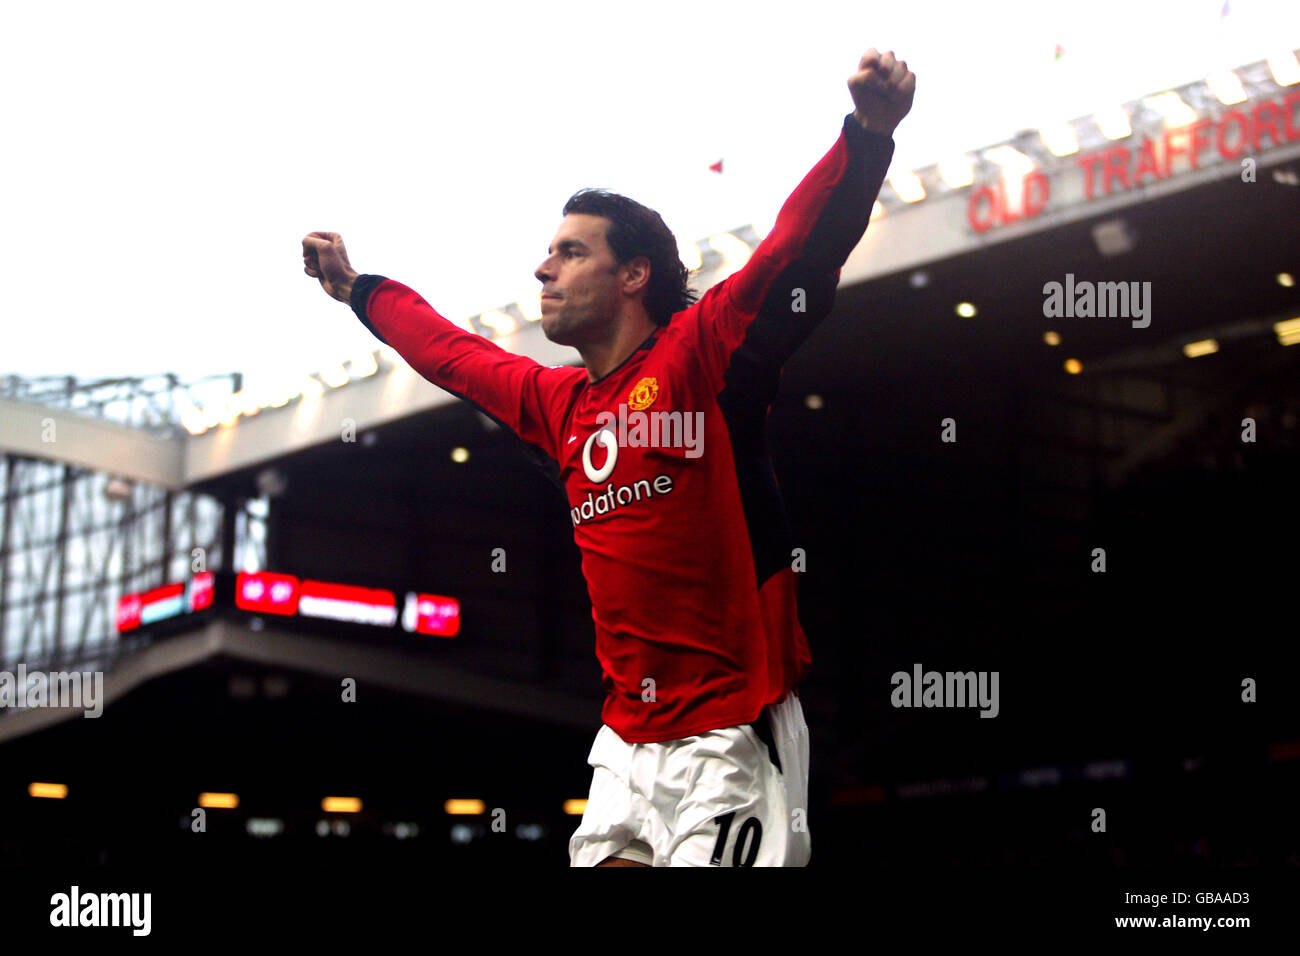 Manchester United's Ruud Van Nistelrooy celebrates his first of three goals  against Leicester City Stock Photo - Alamy